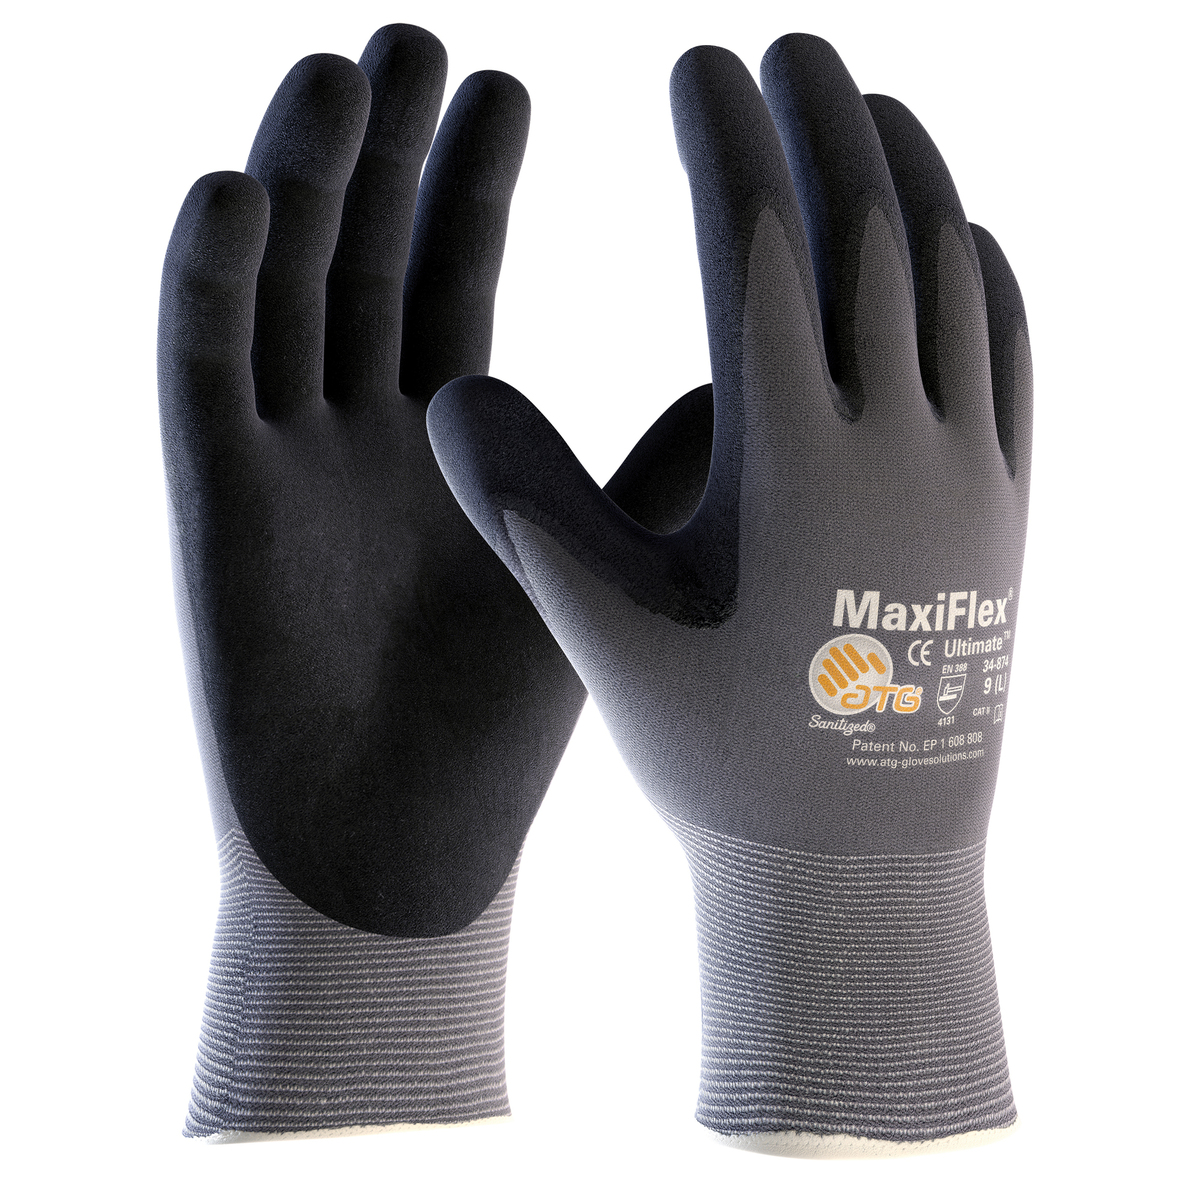 FIRM GRIP X-Large Flex Cuff Outdoor and Work Gloves (2-Pack) 43128